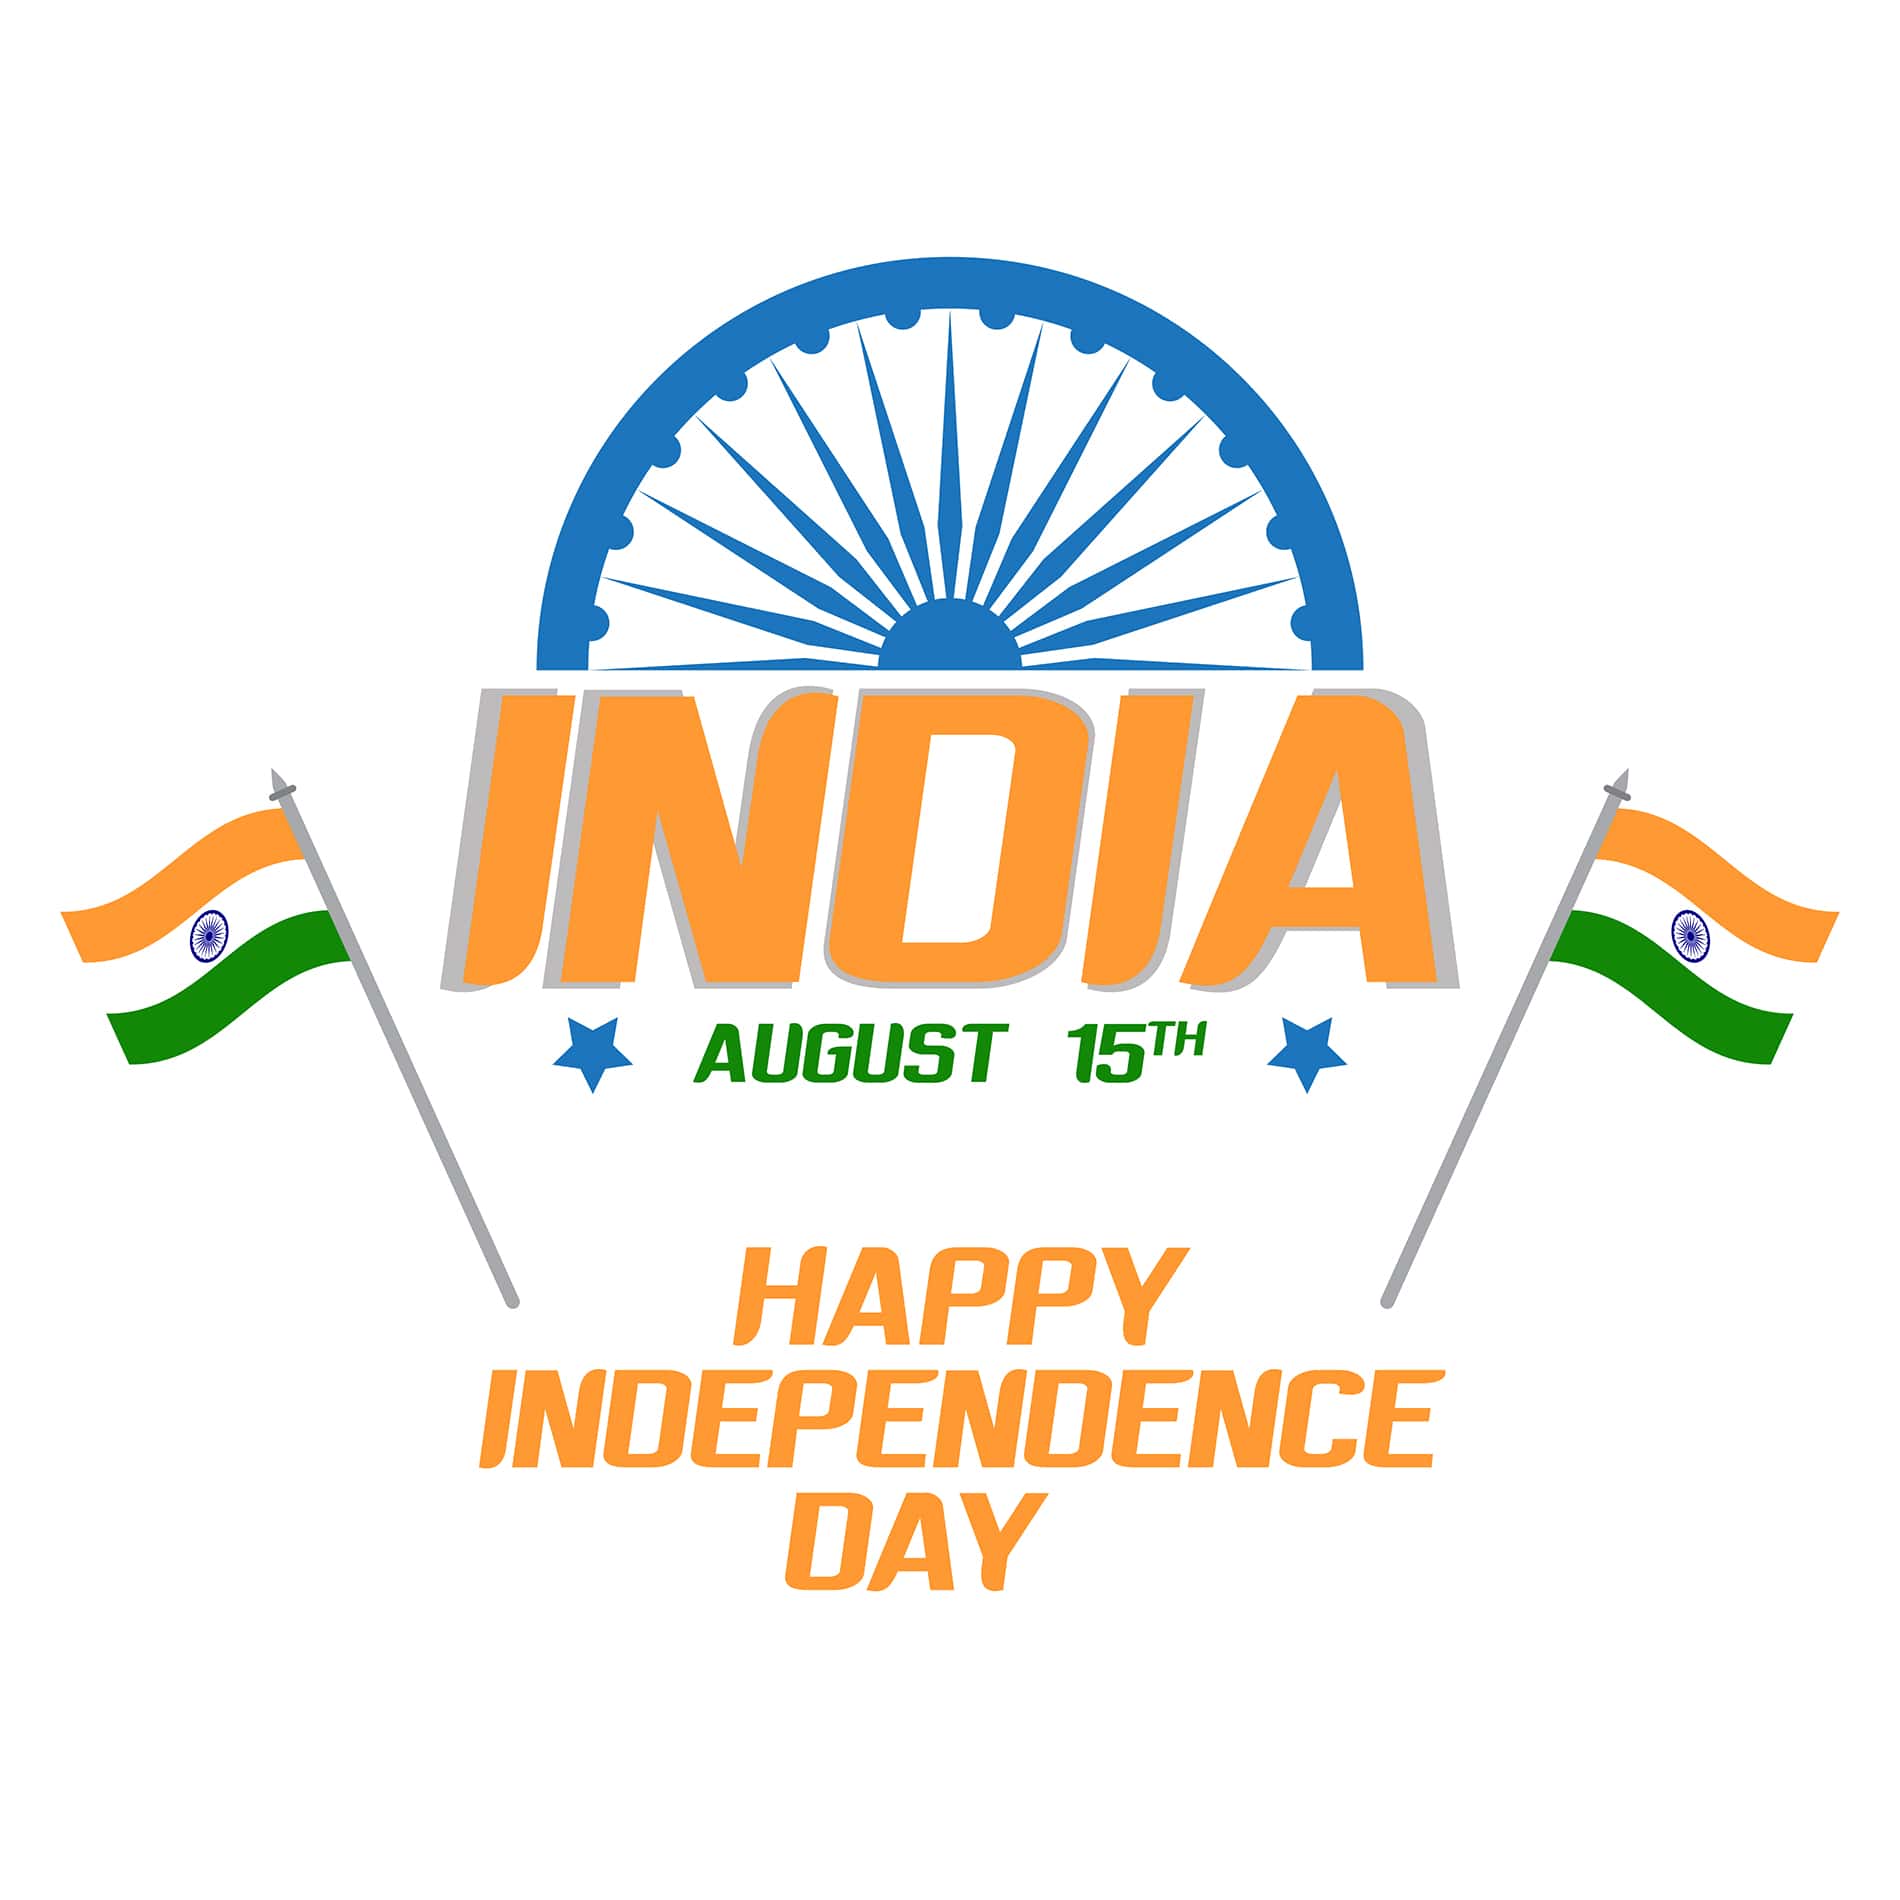 Indian Independence Day wishes vector graphic element for free download with flag and tri color